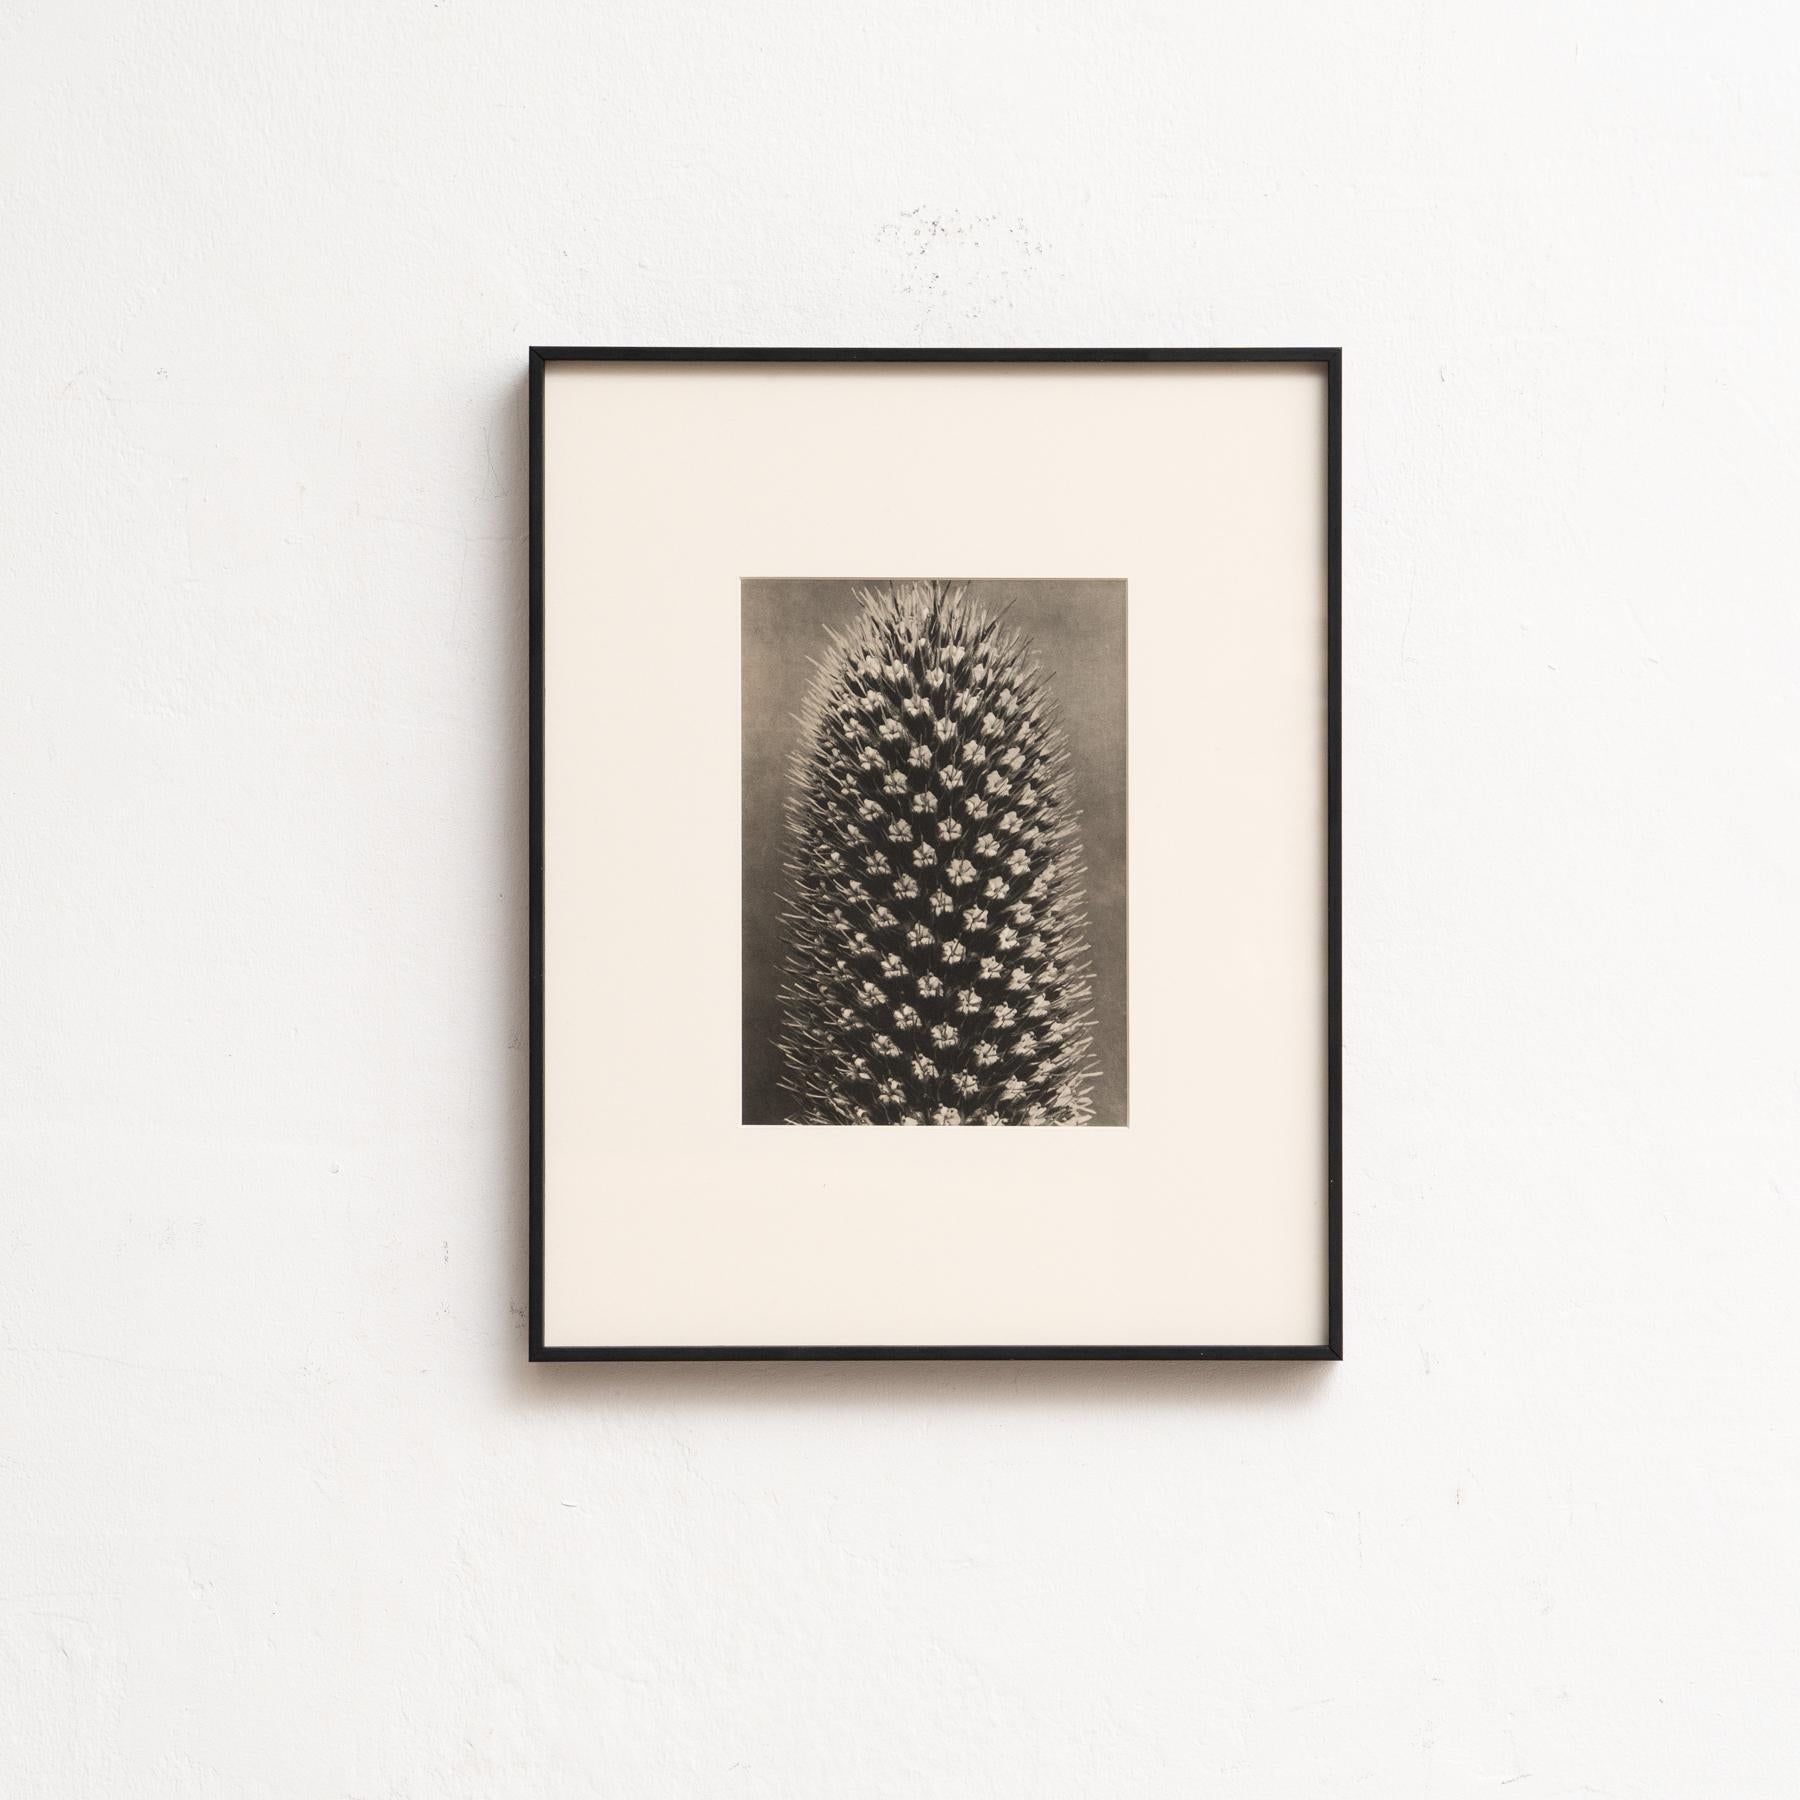 Presenting a captivating Karl Blossfeldt Photogravure from the 1942 edition of the book 'Wunder in der Natur.' 

In its original condition, this piece boasts minor wear that beautifully weaves into its historical narrative, showcasing a lovely